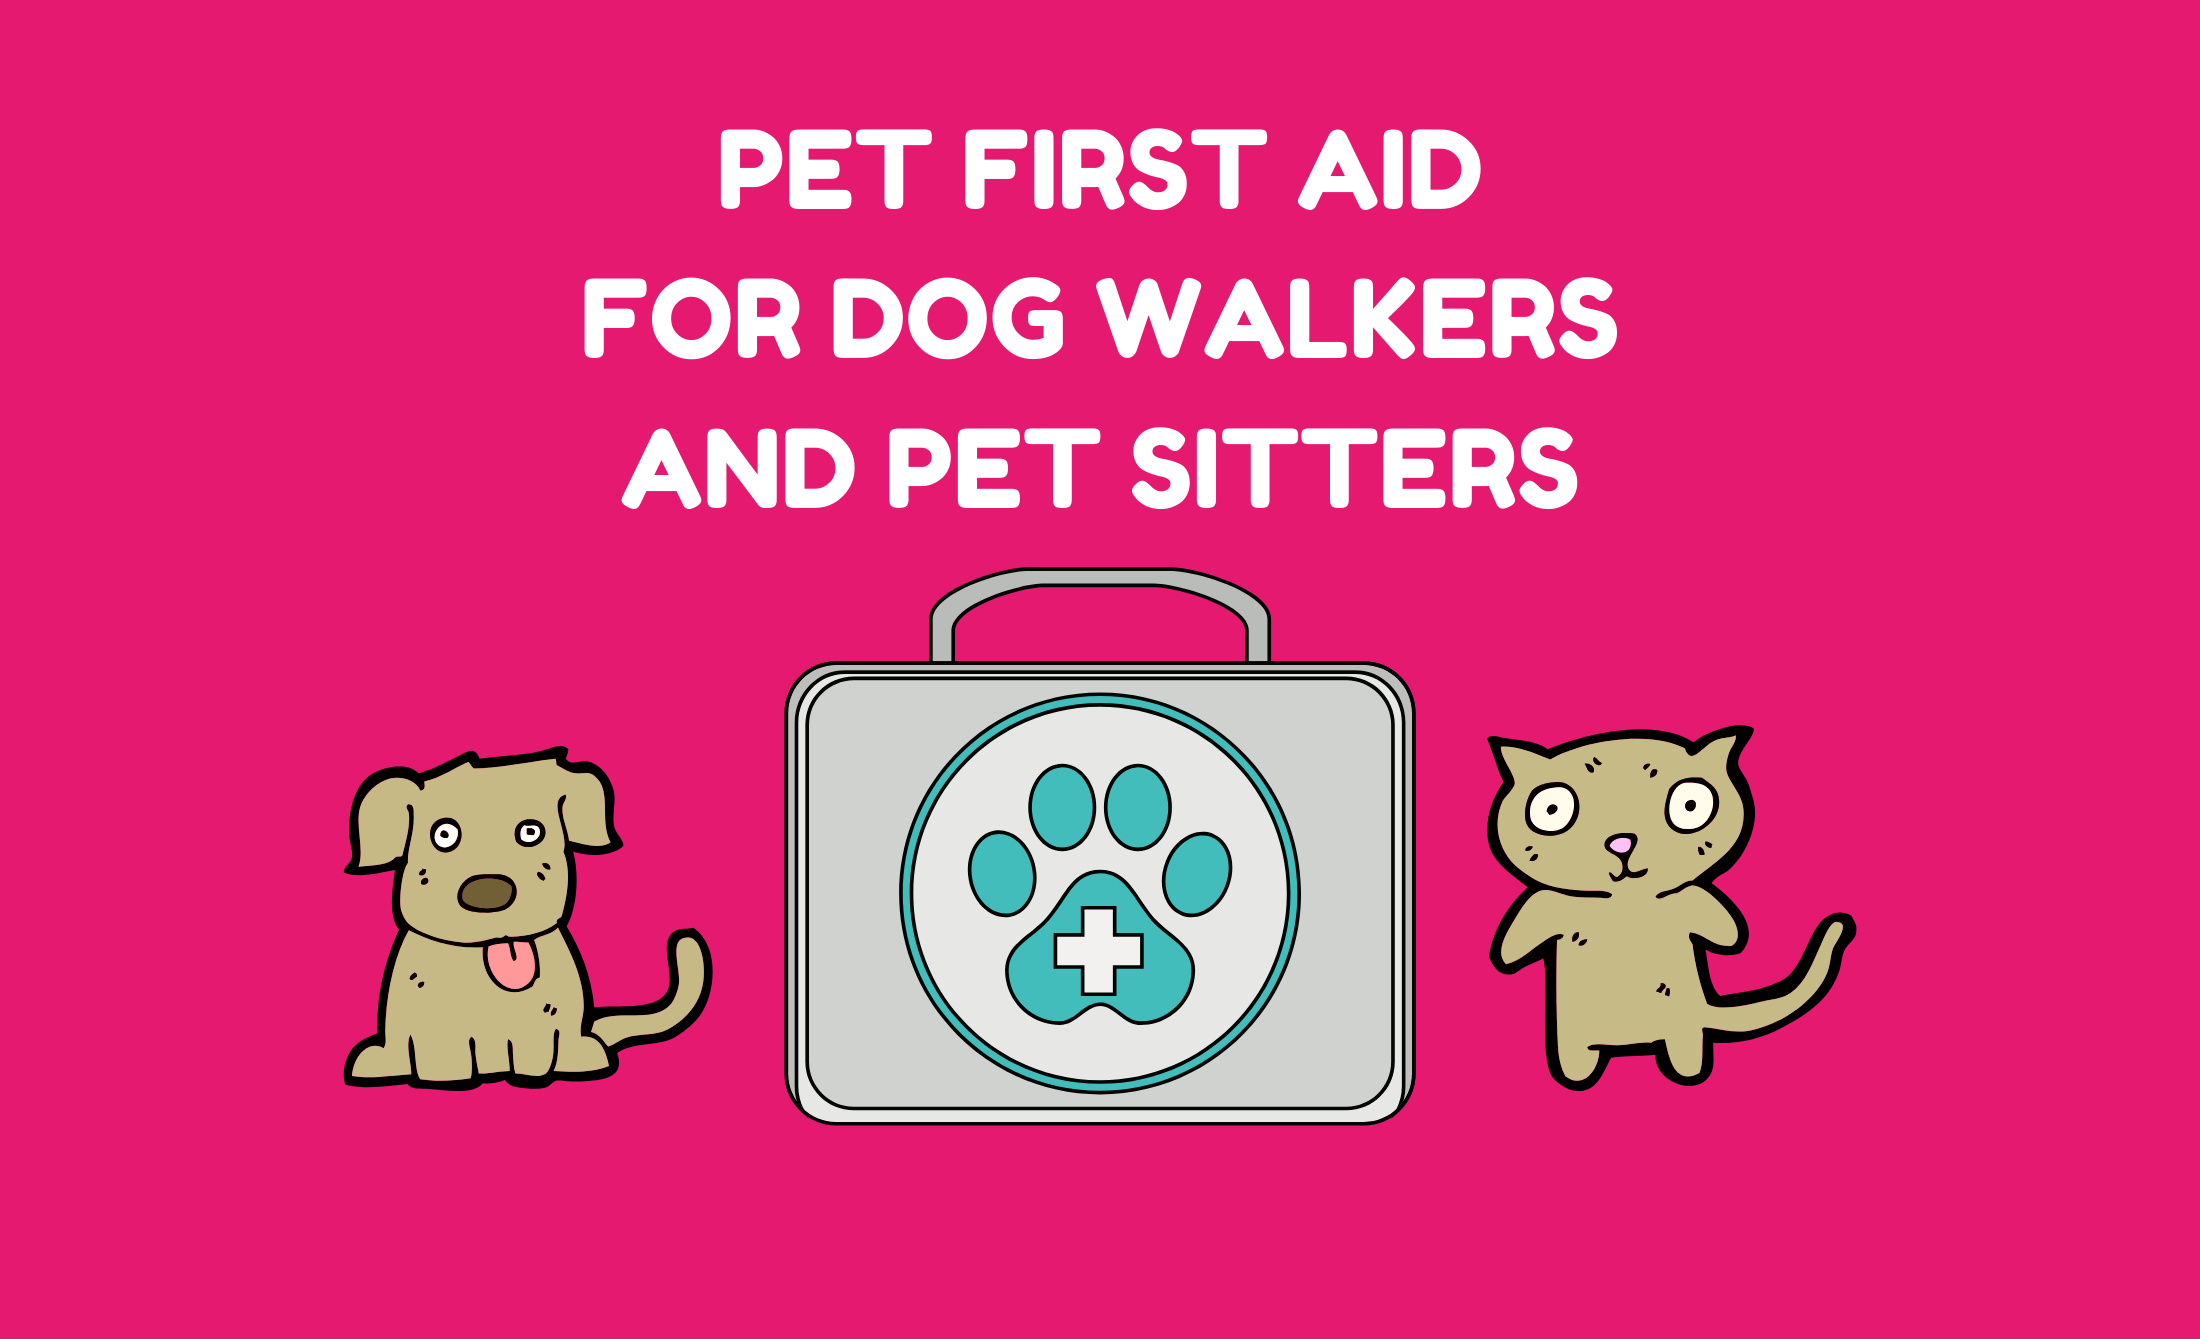 Pet-first-aid-for-dog-walkers-and-pet-sitters